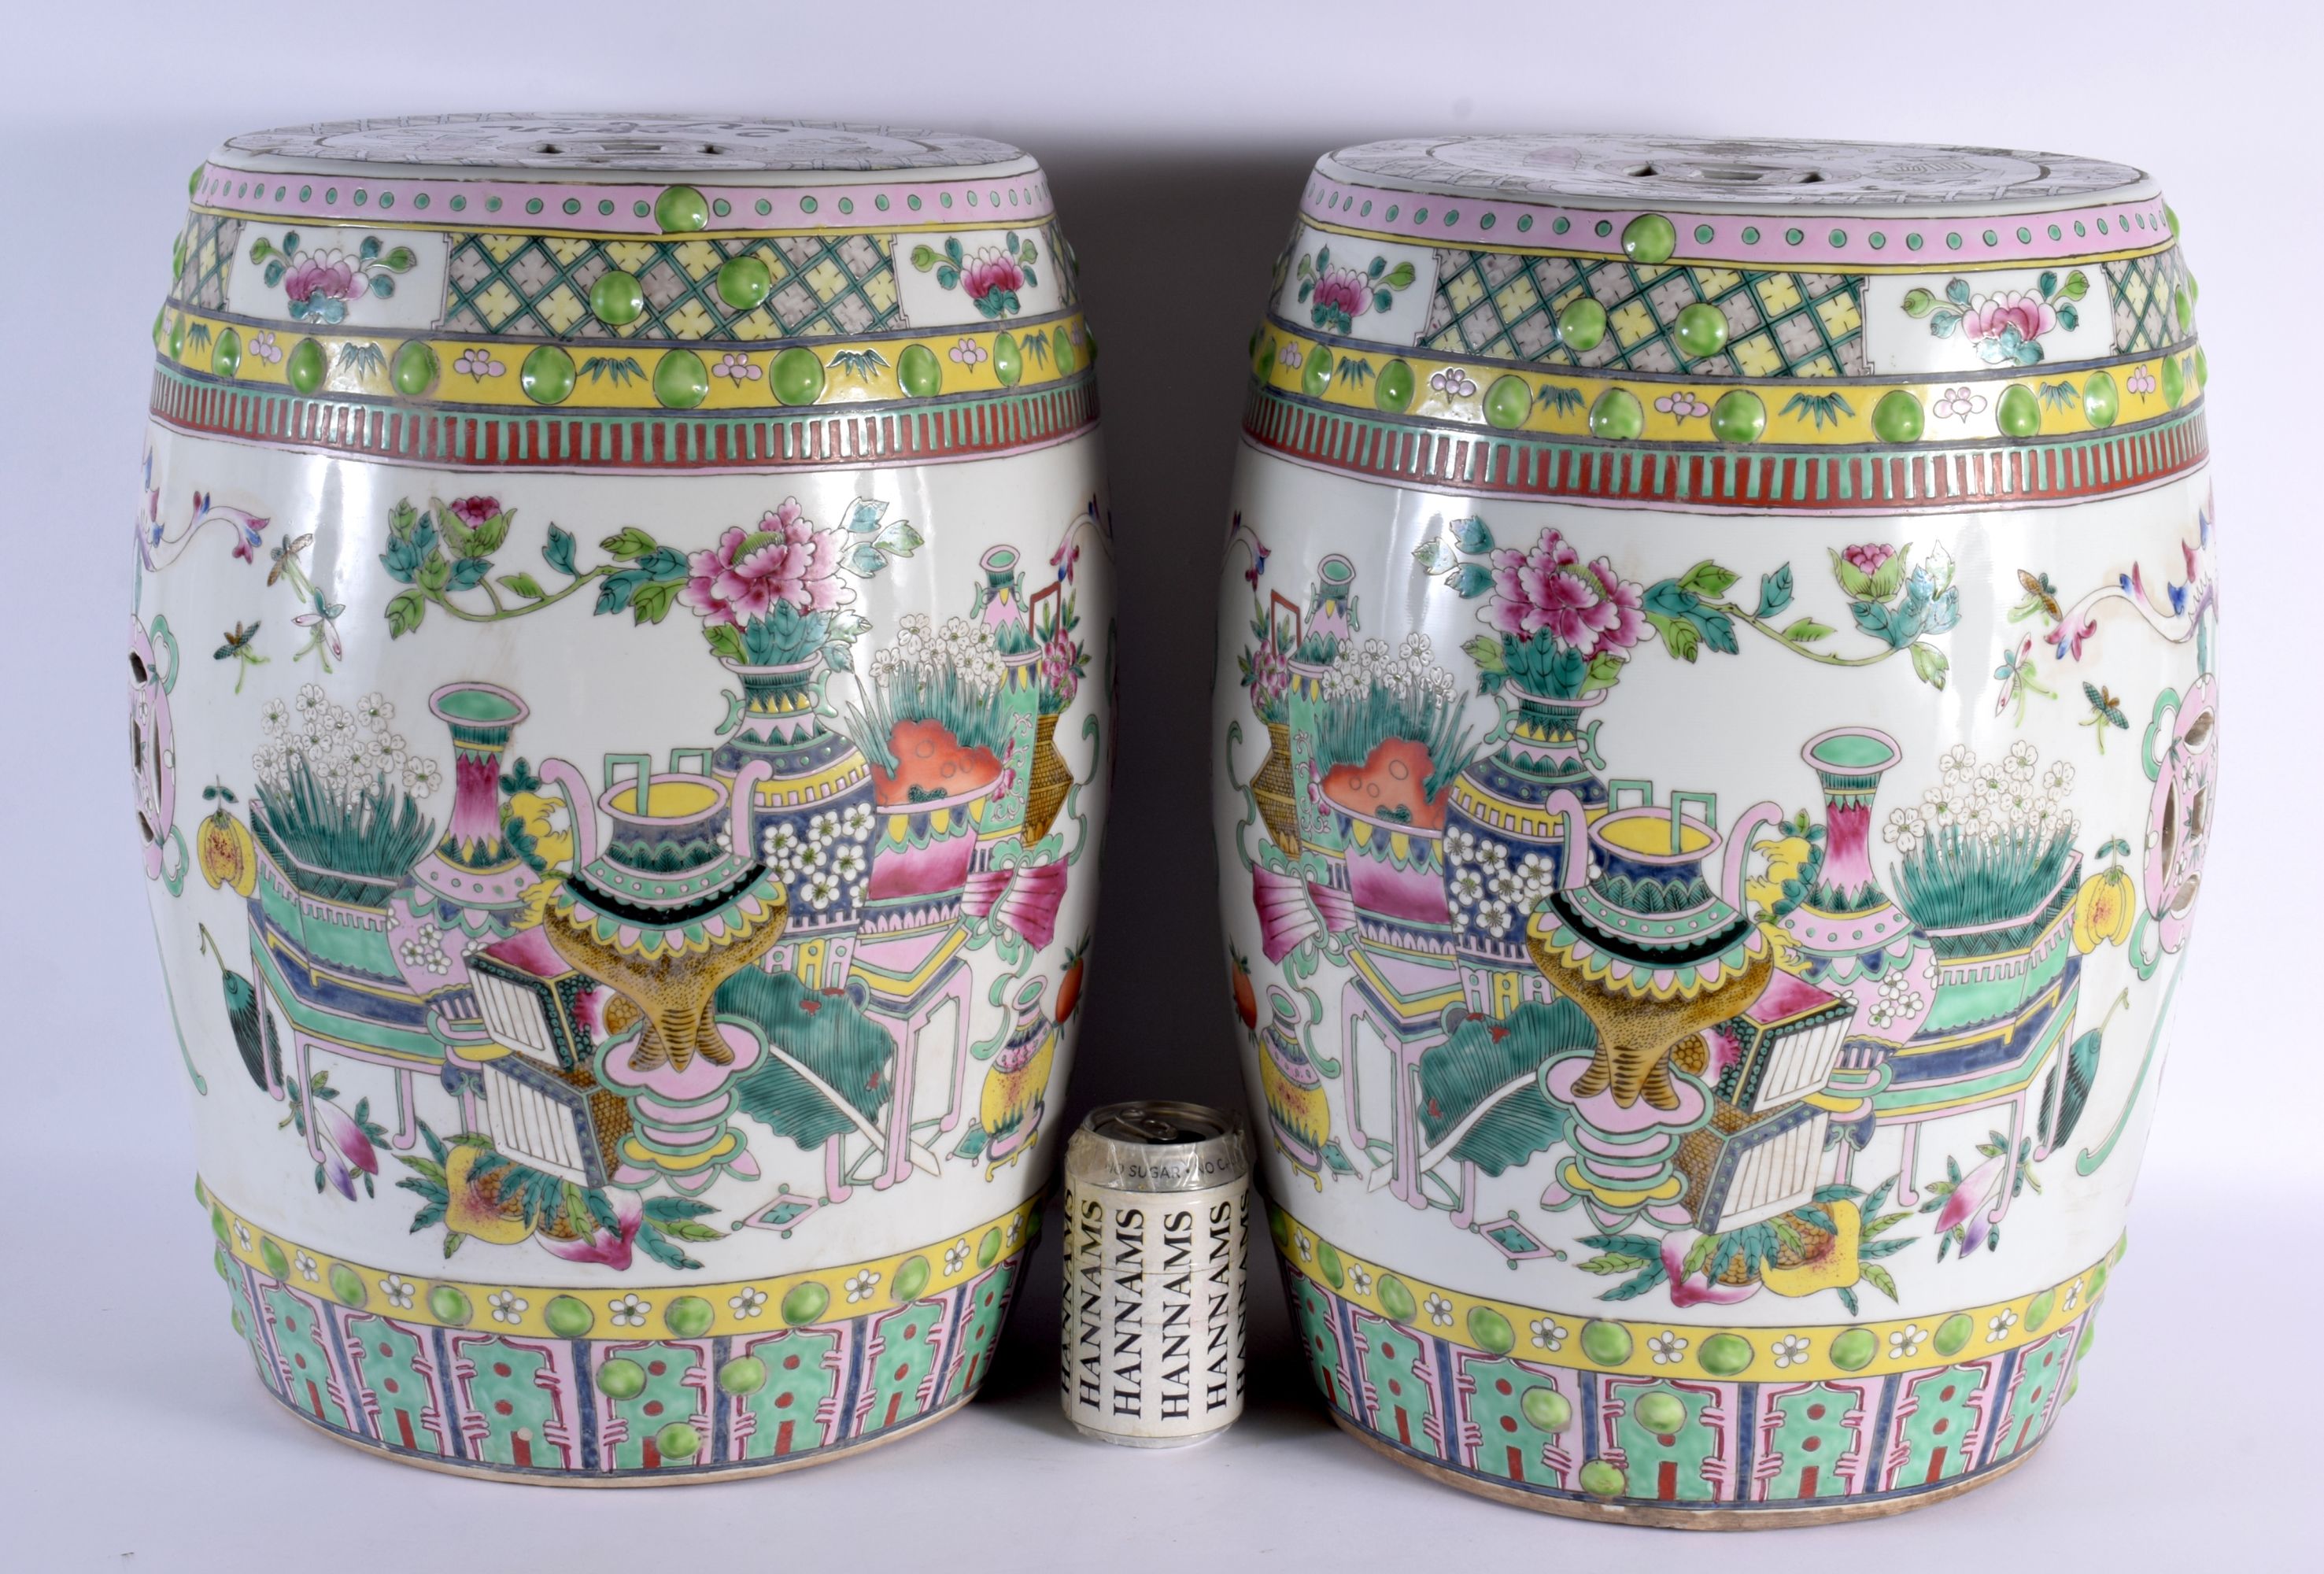 A LARGE PAIR OF CHINESE REPUBLICAN PERIOD FAMILLE ROSE GARDEN SEATS painted with objects. 46 cm x 25